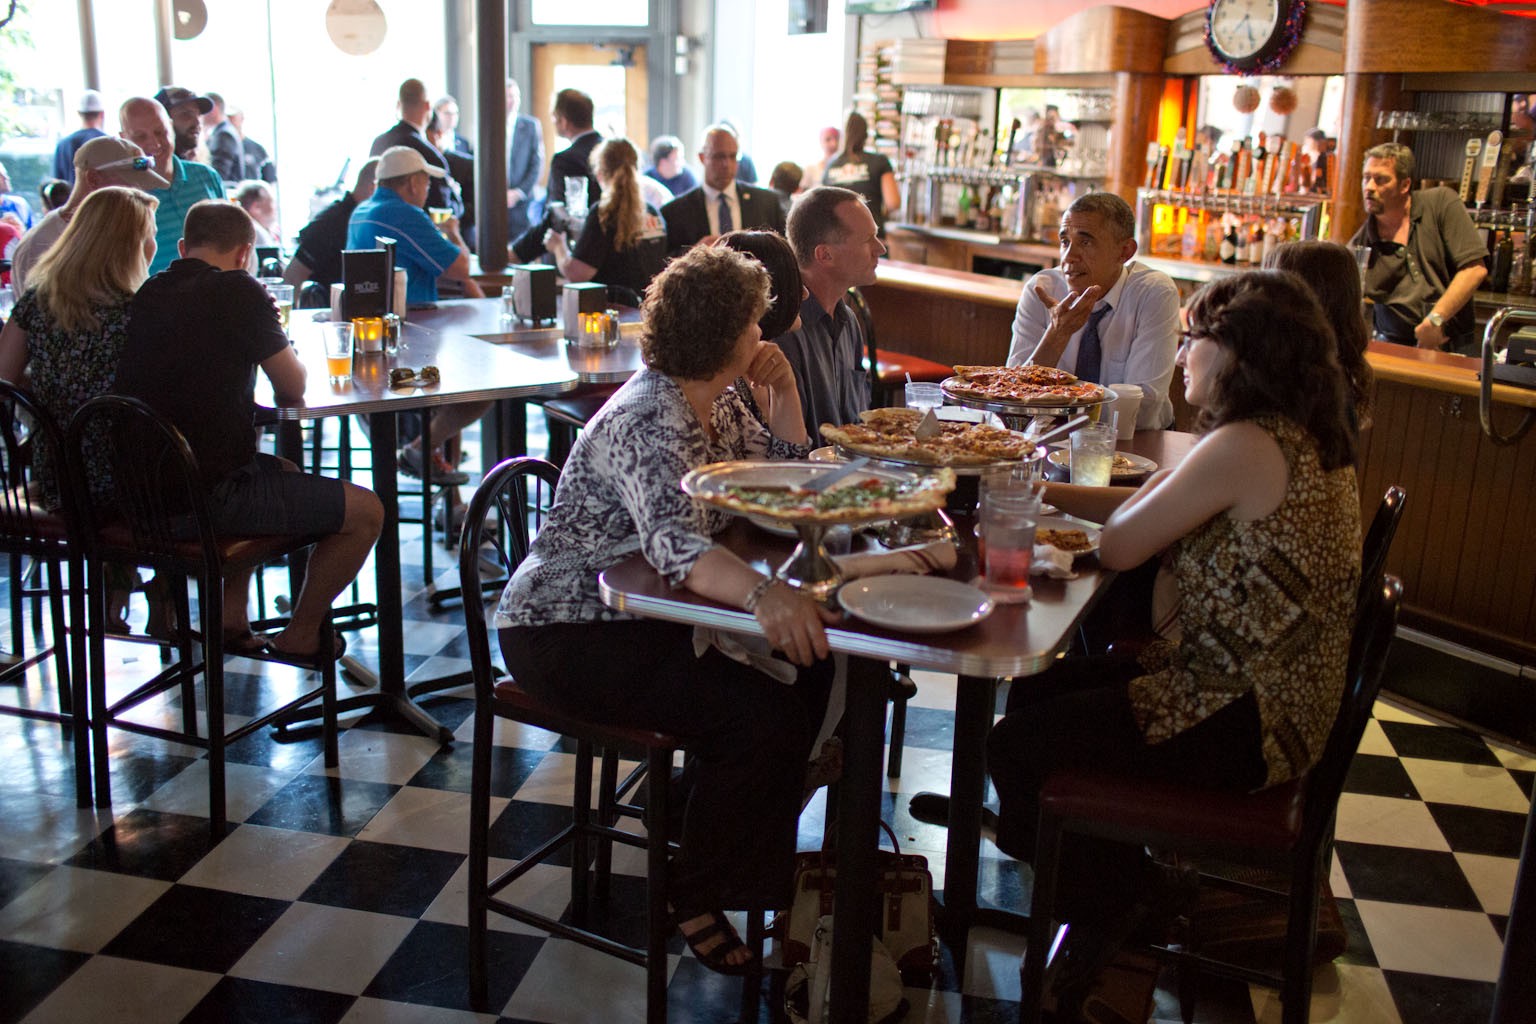 President Obama meets with constituents over pizza.